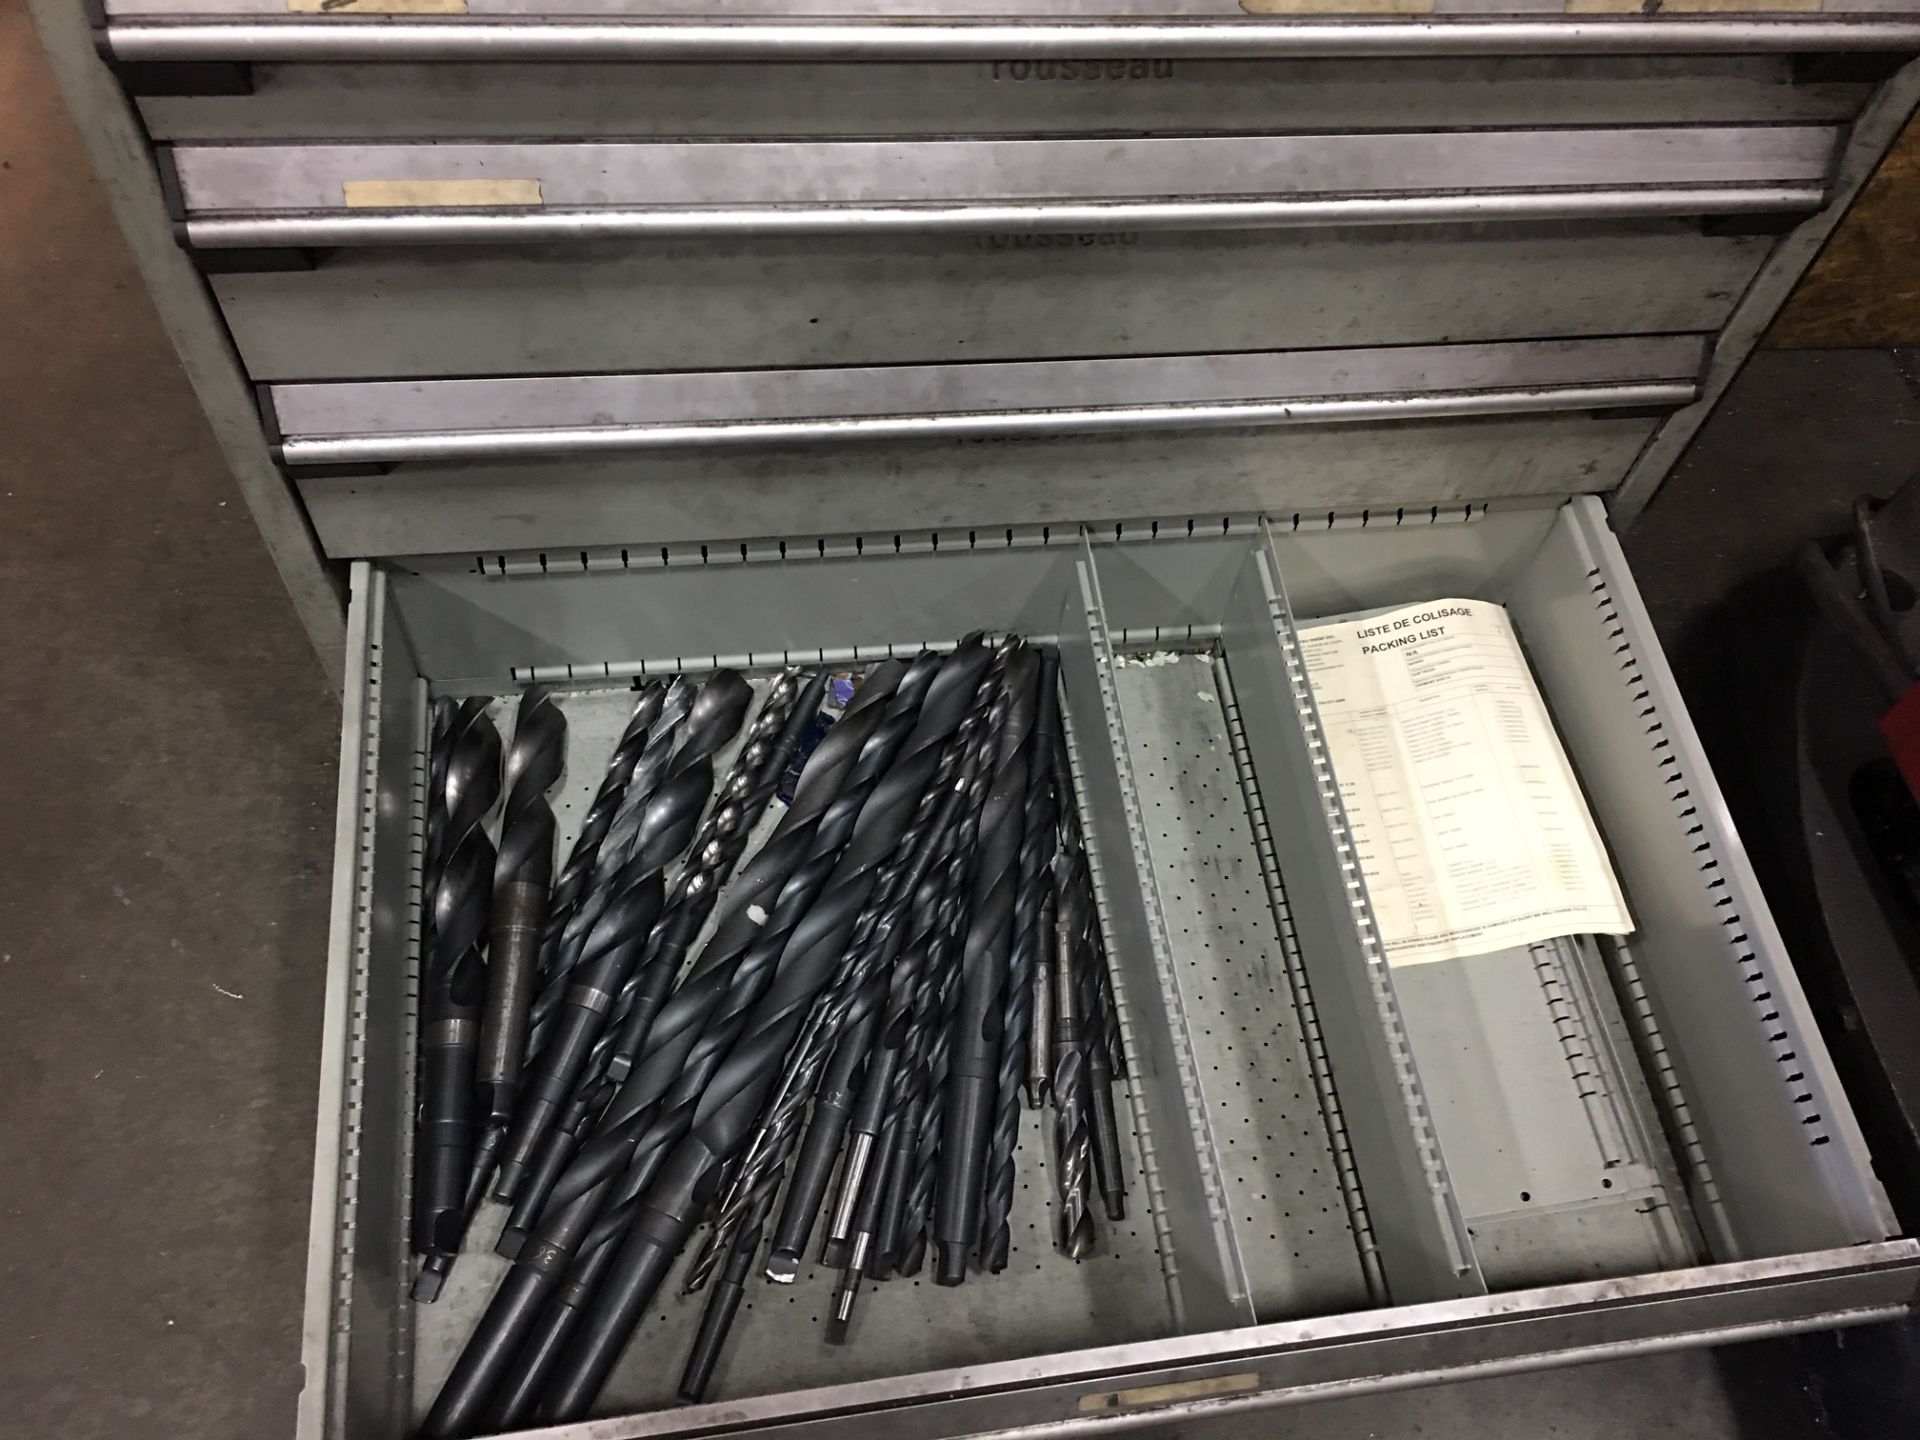 7 Drawer Global Cabinet w/ Drills, Bolts, and Reamers - Image 6 of 6